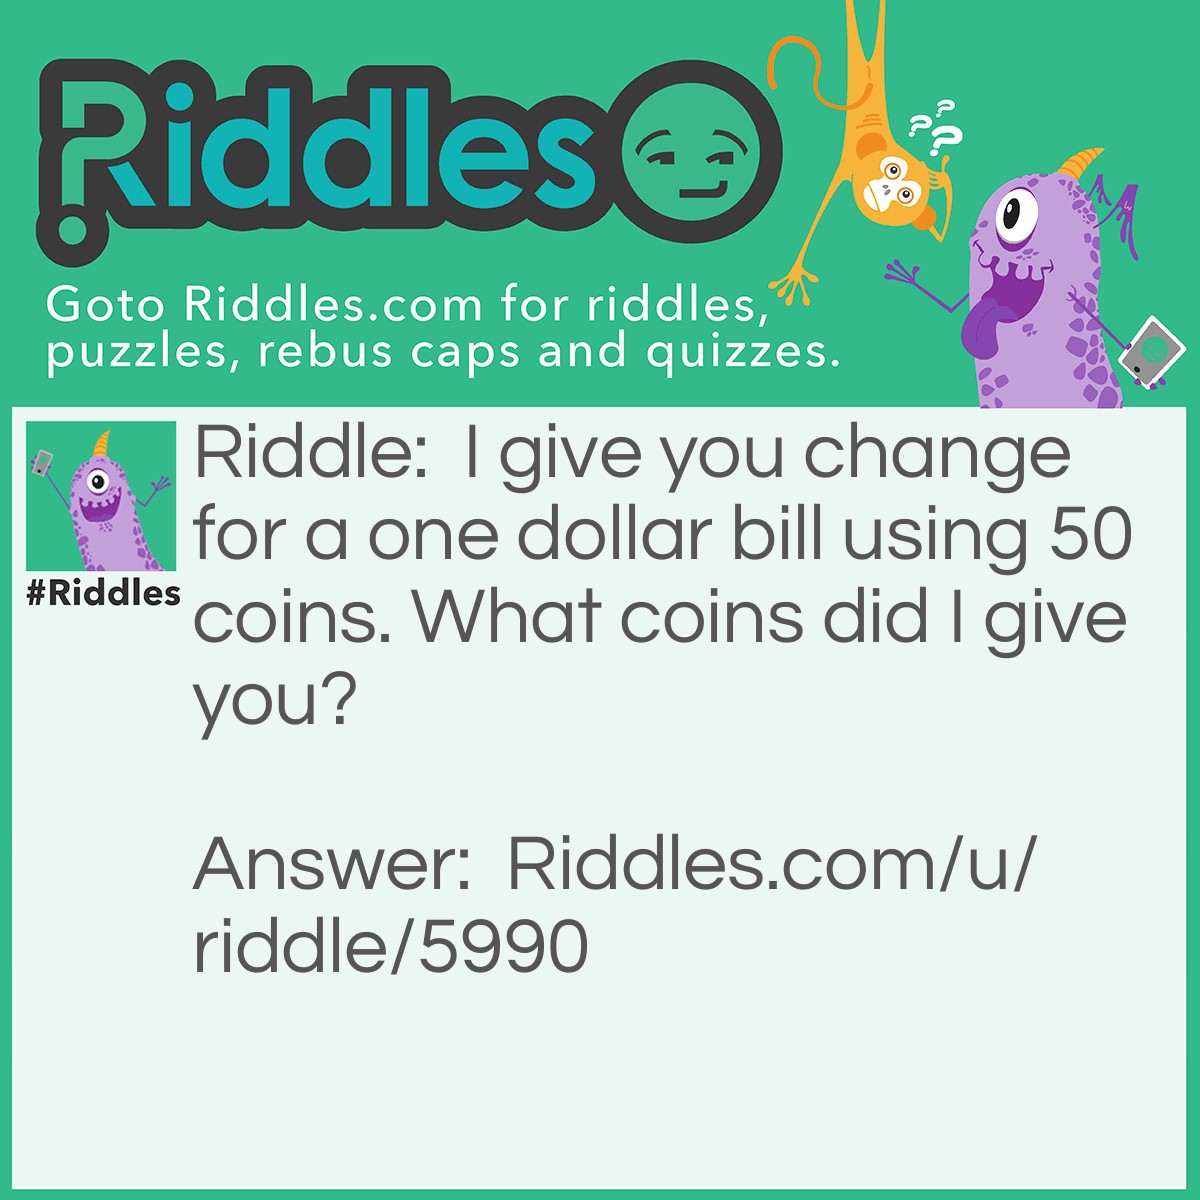 Riddle: I give you change for a one dollar bill using 50 coins. What coins did I give you? Answer: I gave you 40 pennies, 8 nickles, and 2 dimes ... ,40 + ,40 + .20 = 1,00